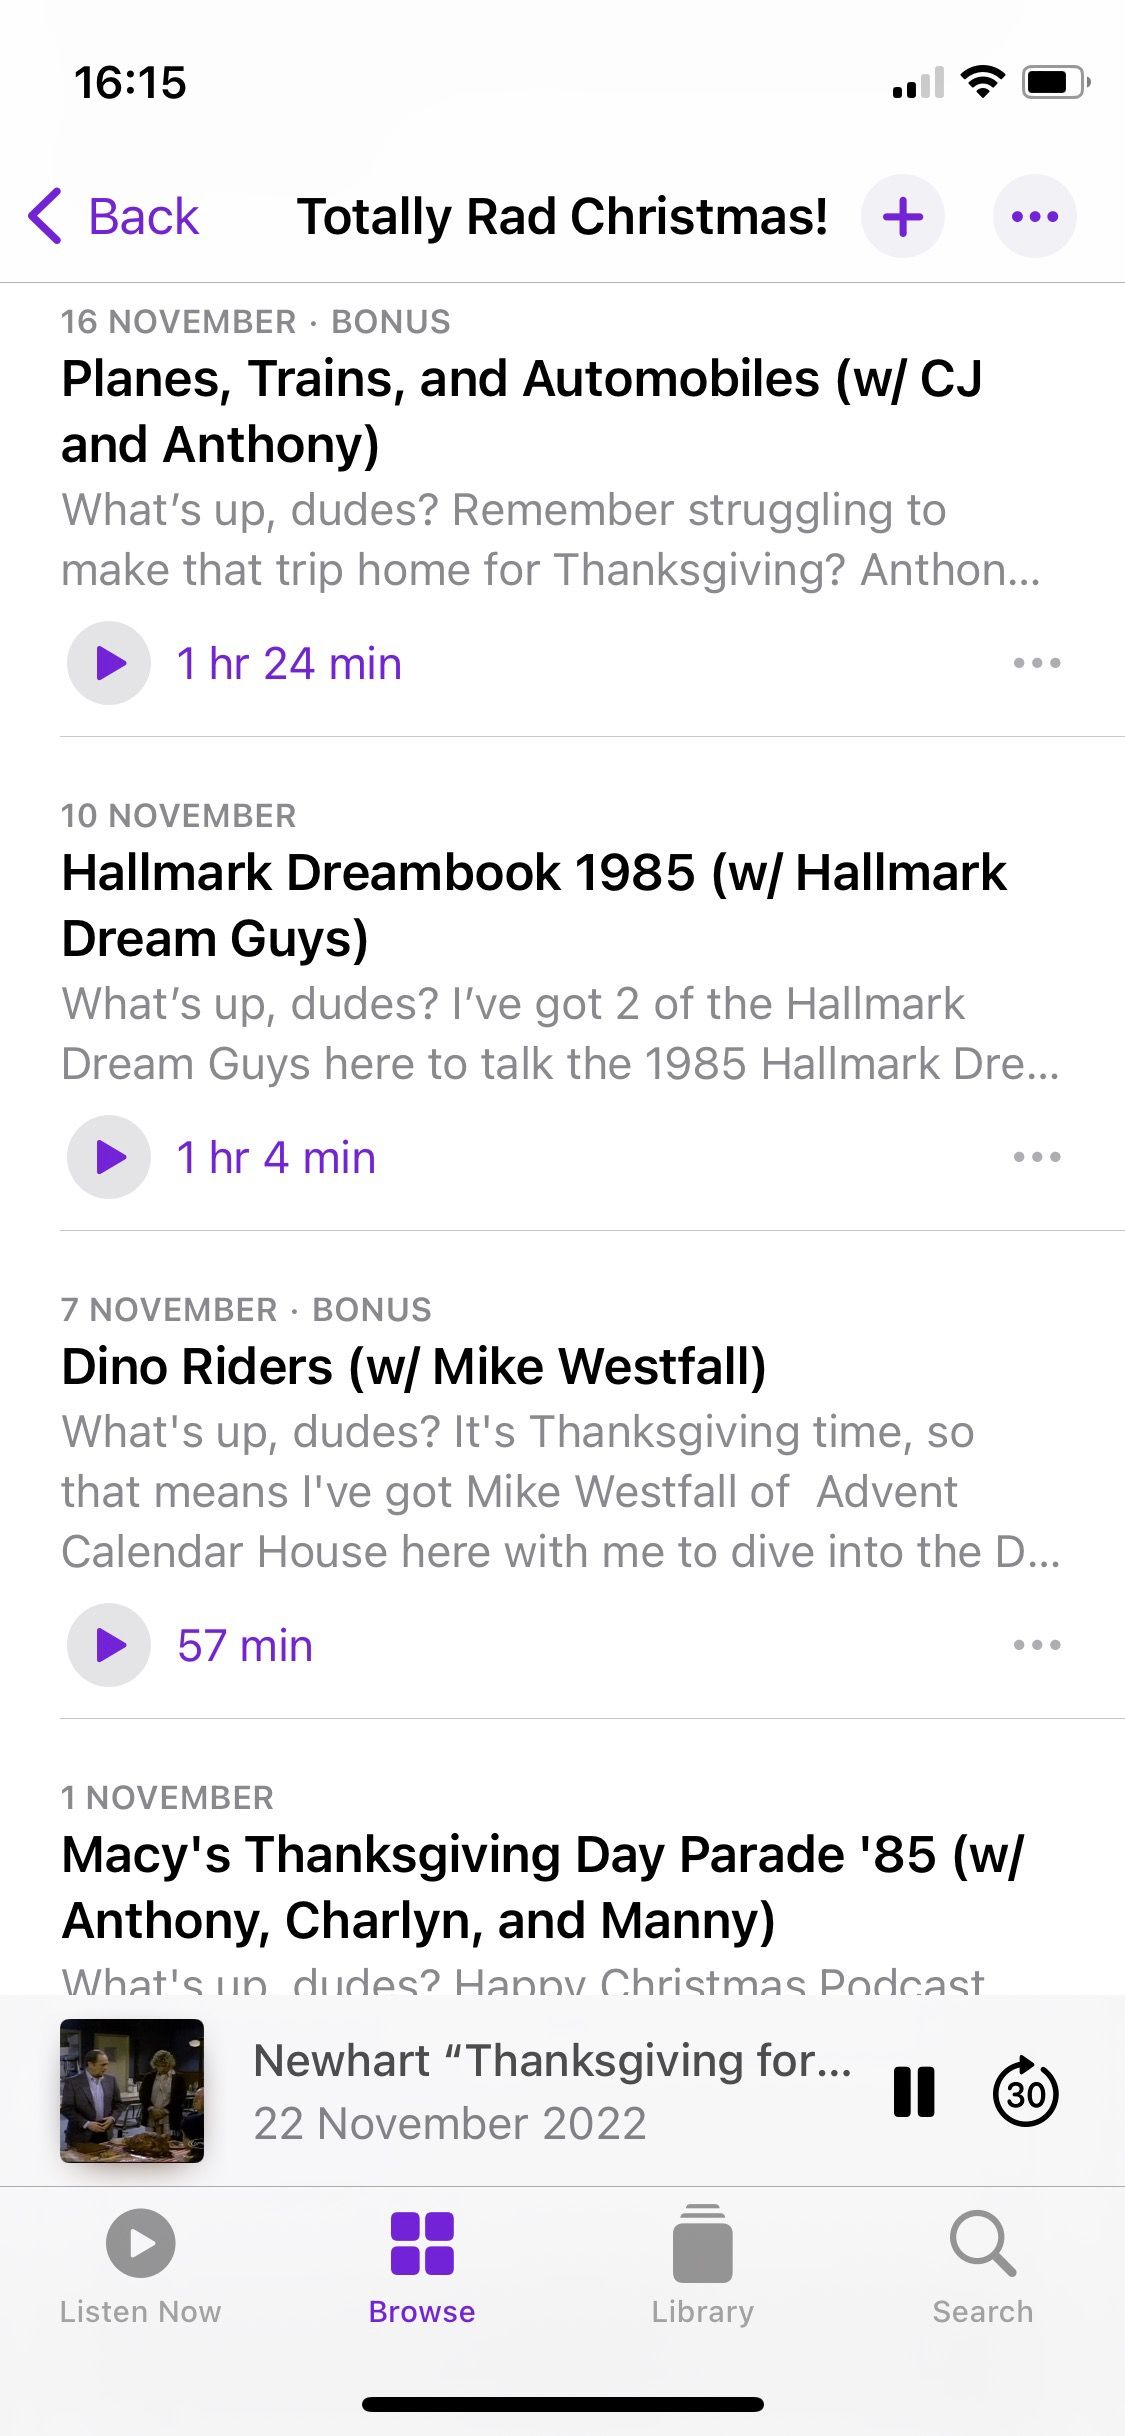 Screenshot of the Totally Rad Christmas podcast showing the episode list